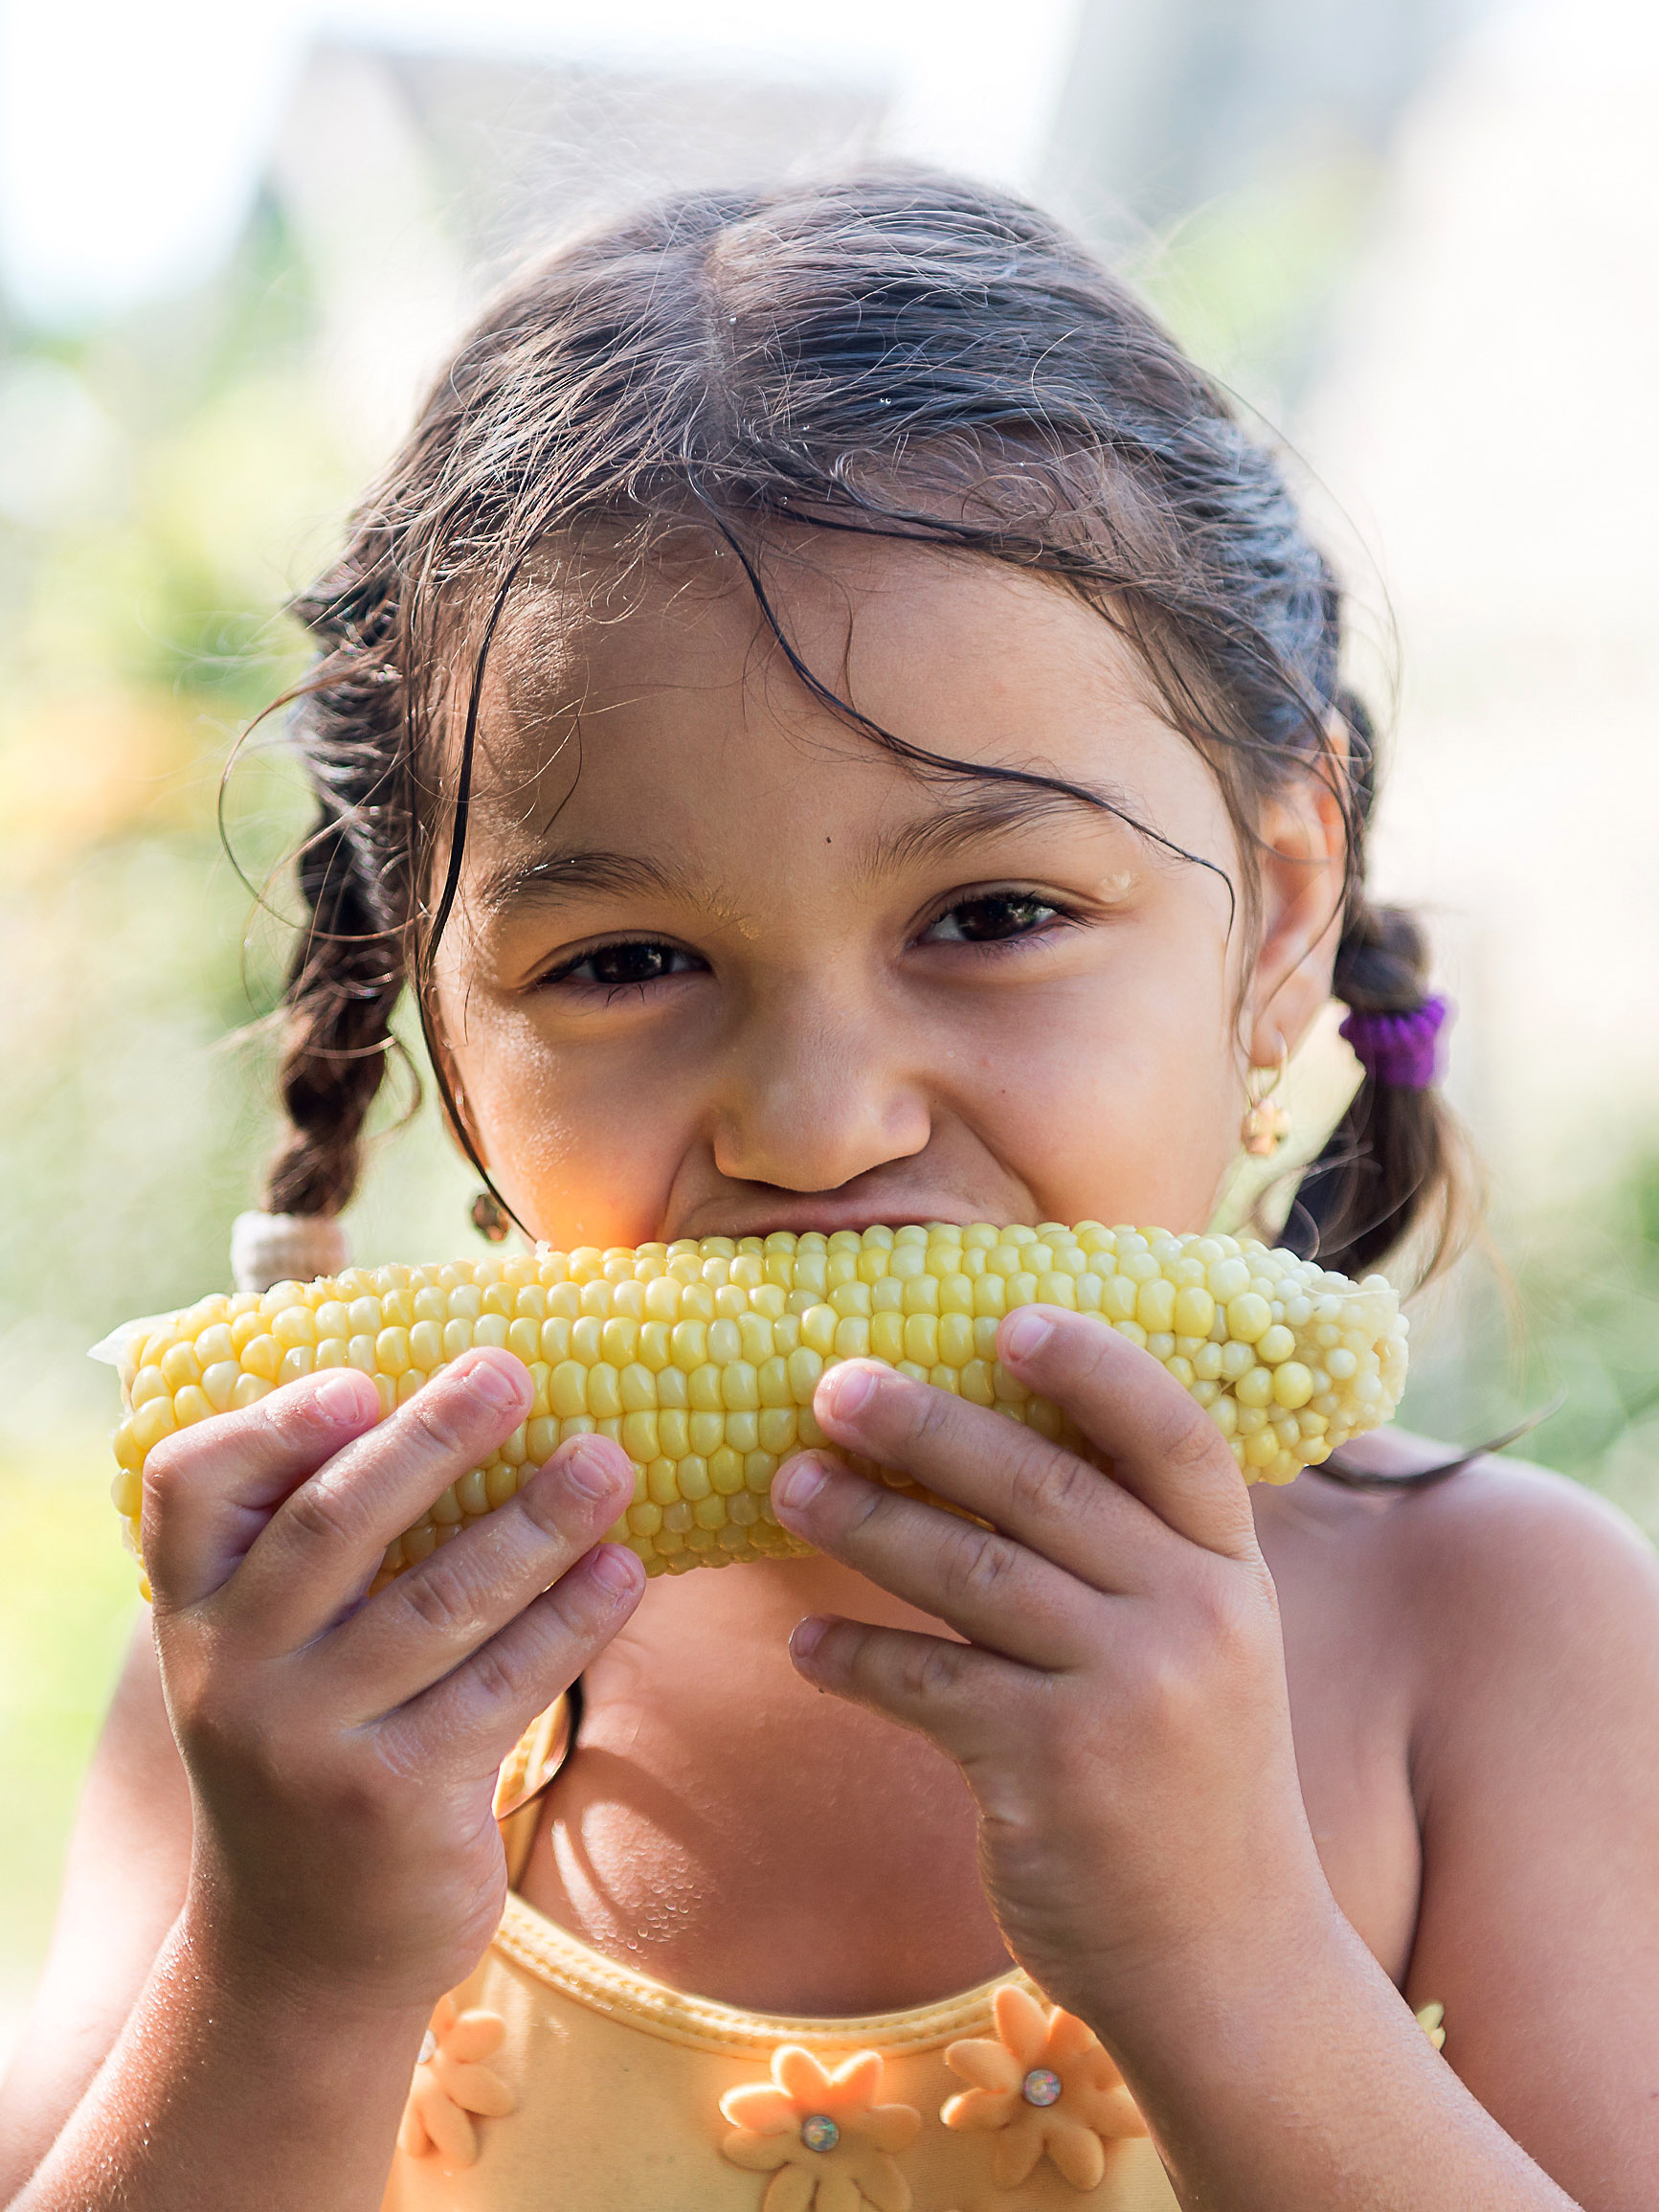 young girl eating corn on the cob on a summer day